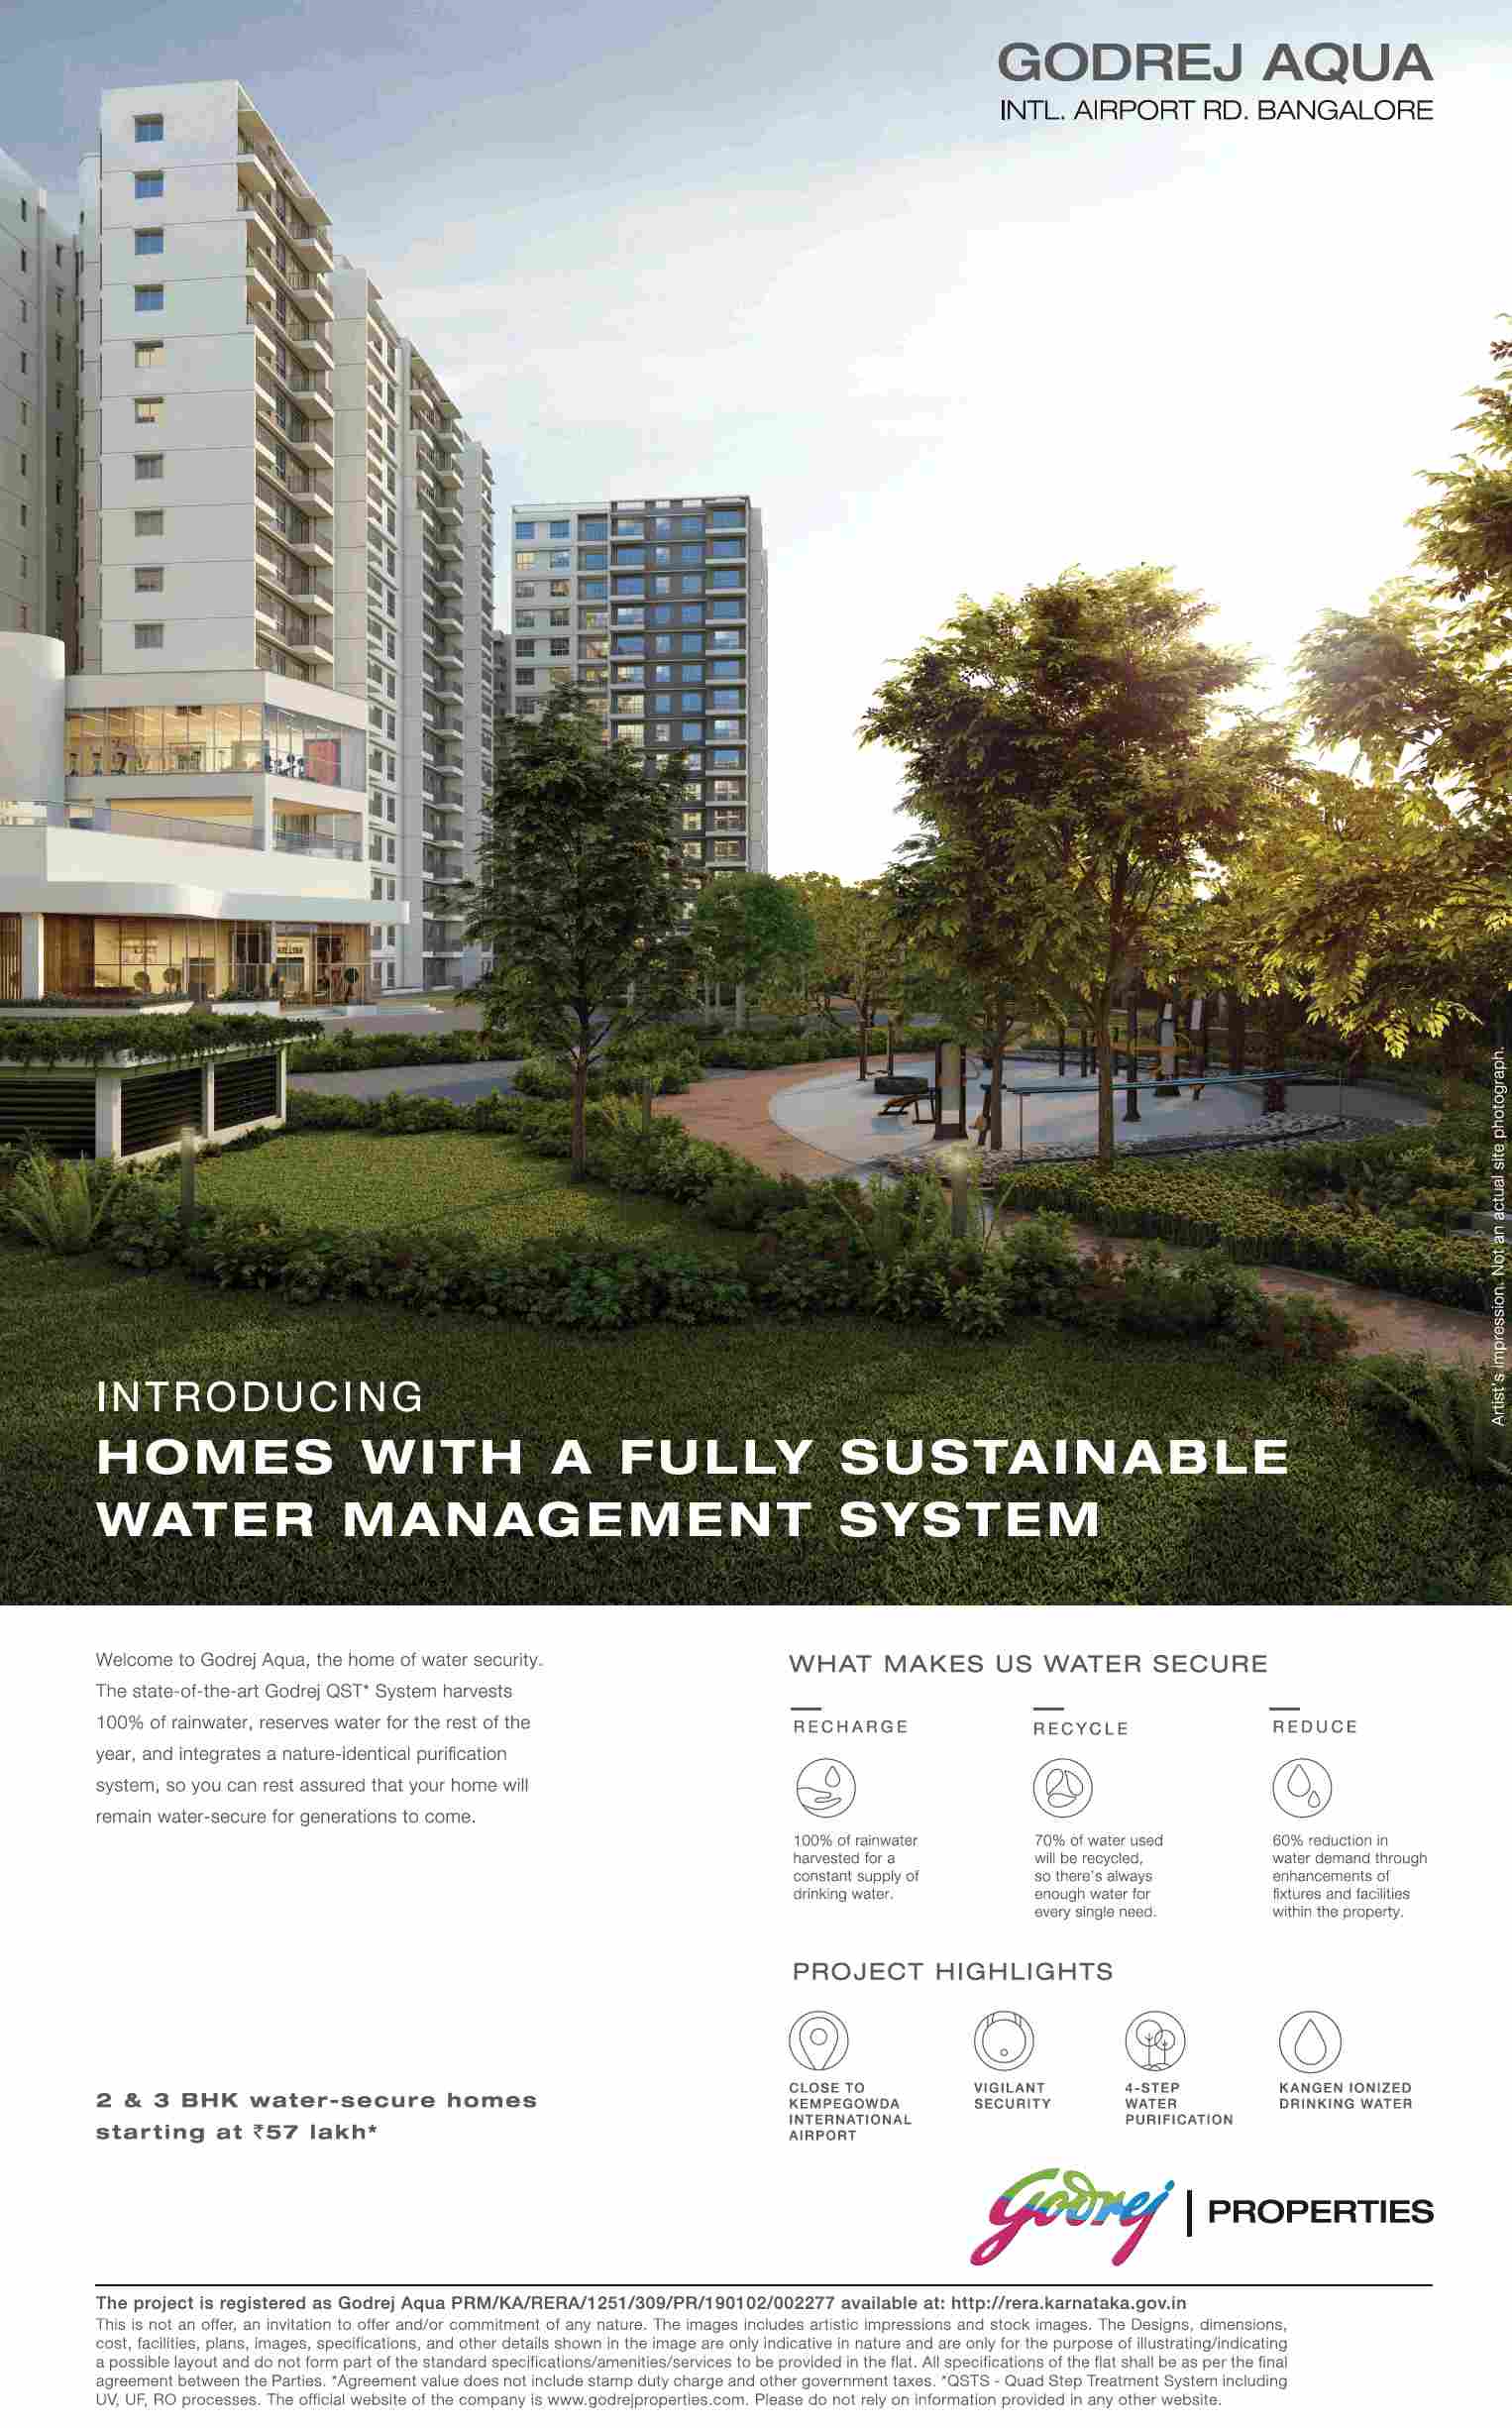 Introducing homes with fully sustainable water management system at Godrej Aqua in Bangalore Update